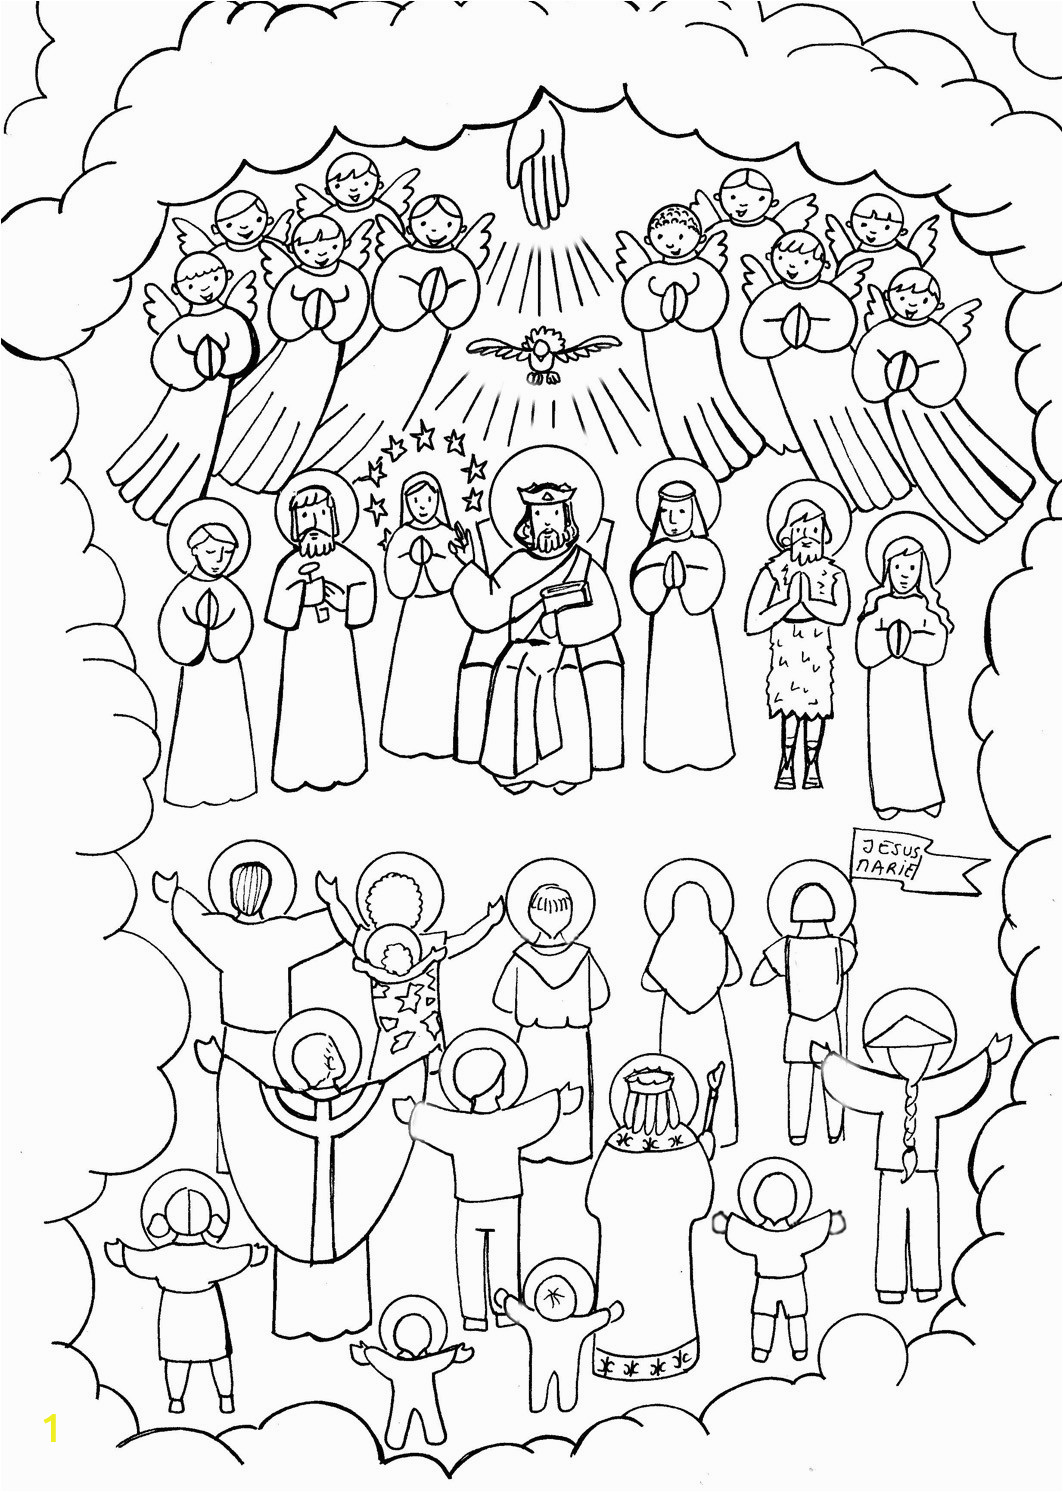 Free Printable All Saints Day Coloring Pages All Saints Day Coloring Pages Home Sketch Coloring Page